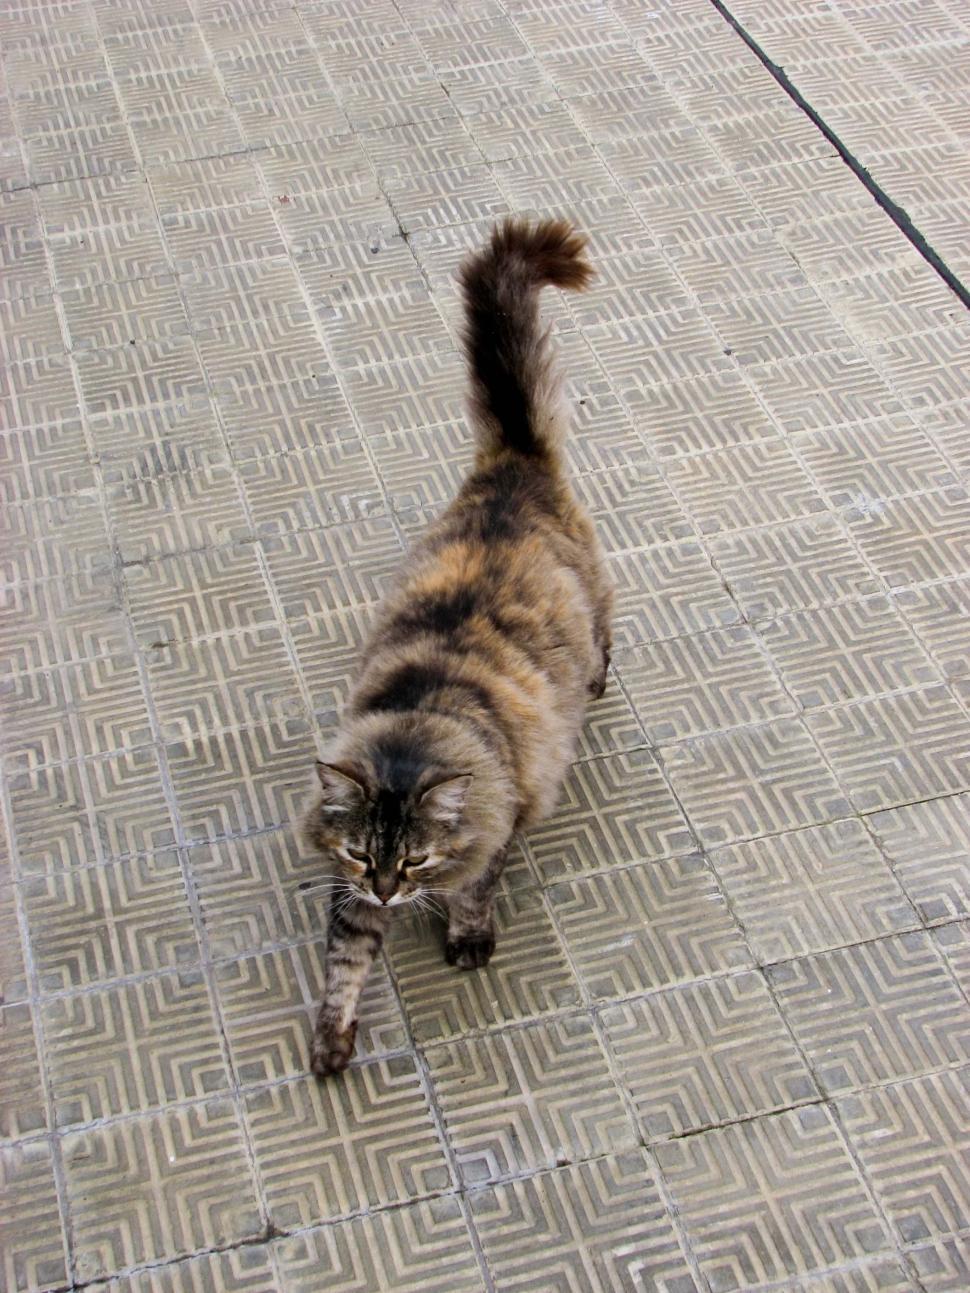 Free Image of Cat Walking Across Tiled Floor Next to Fire Hydrant 